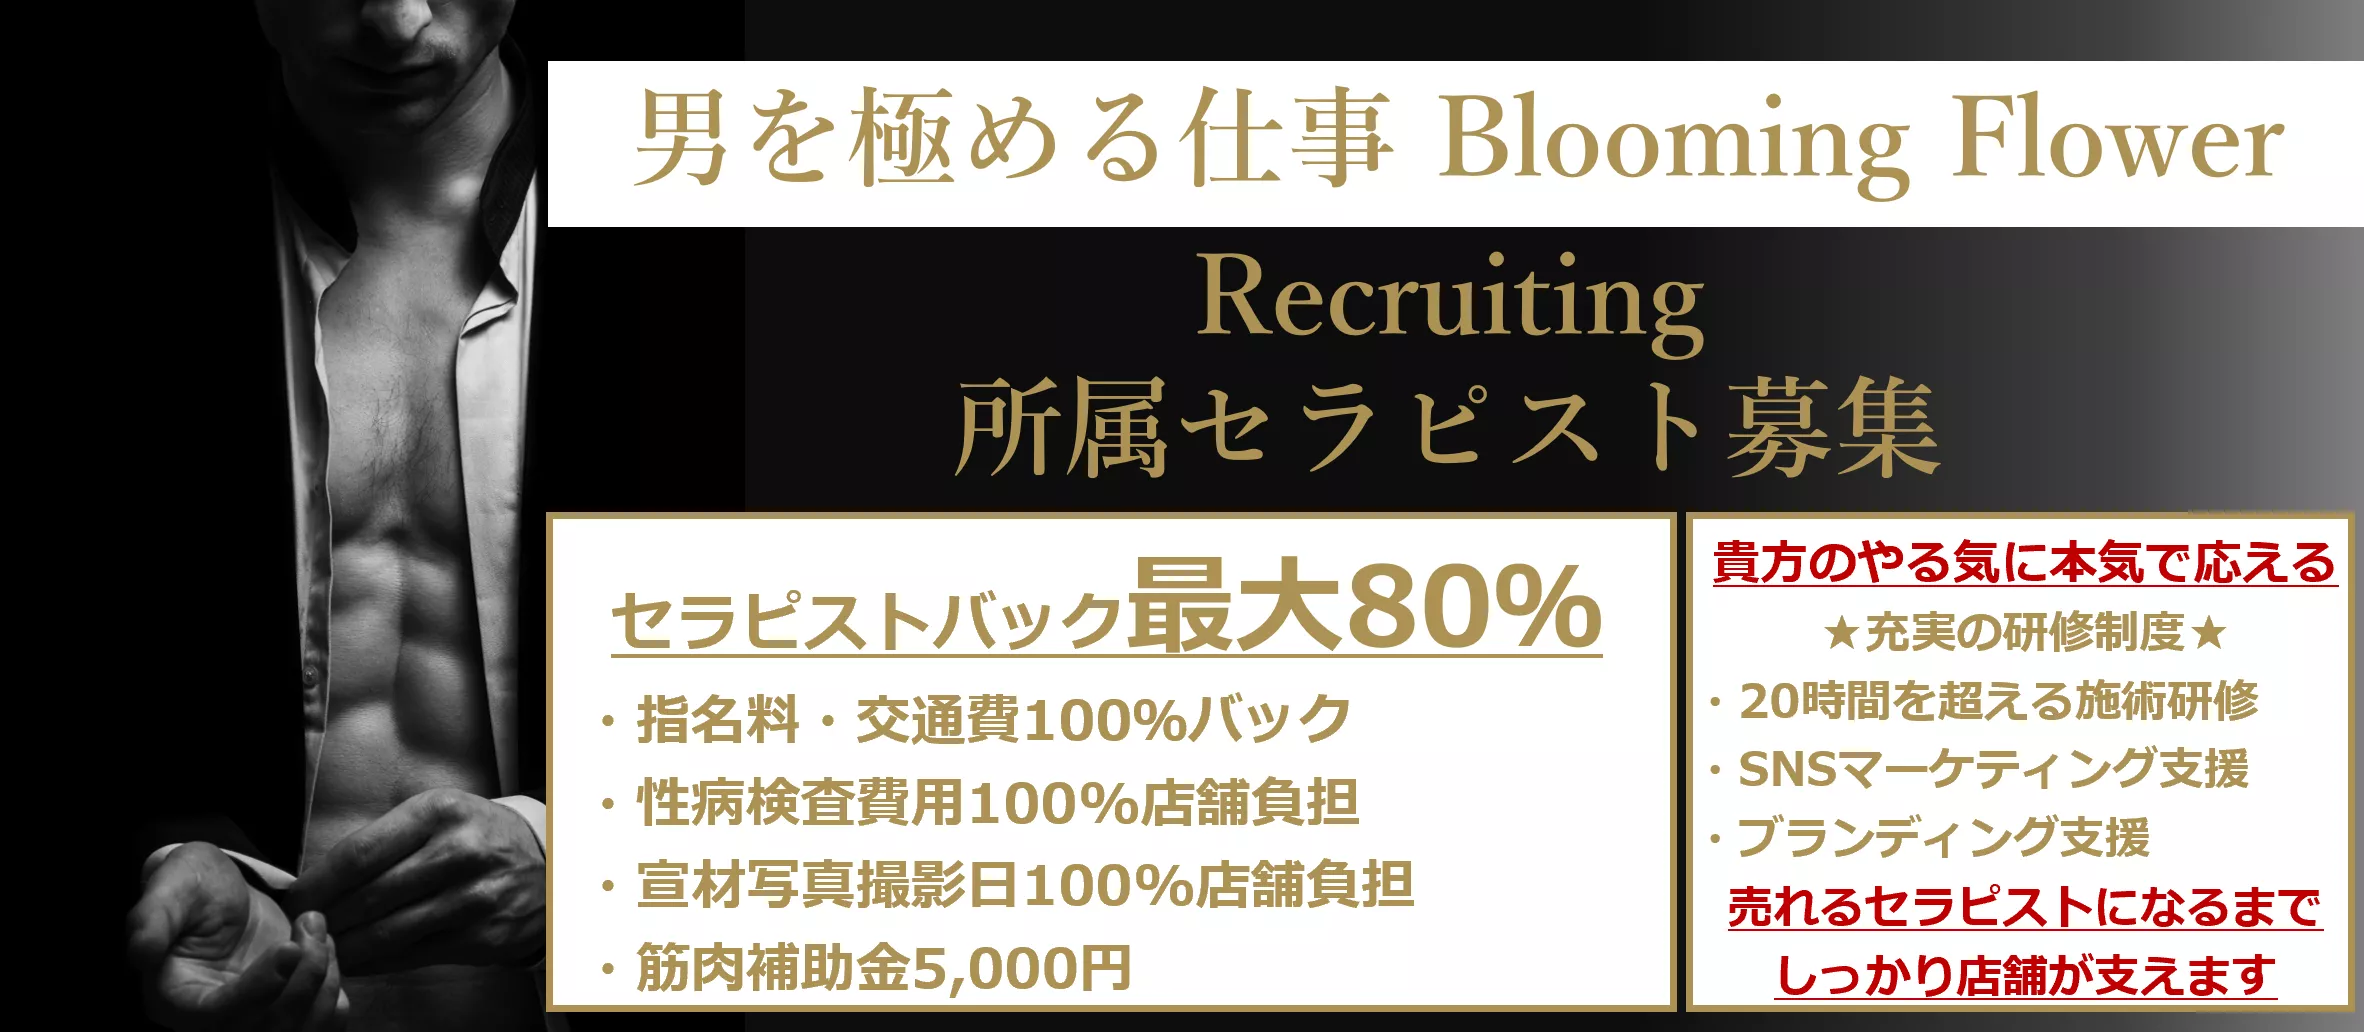 Blooming Flowerの求人情報